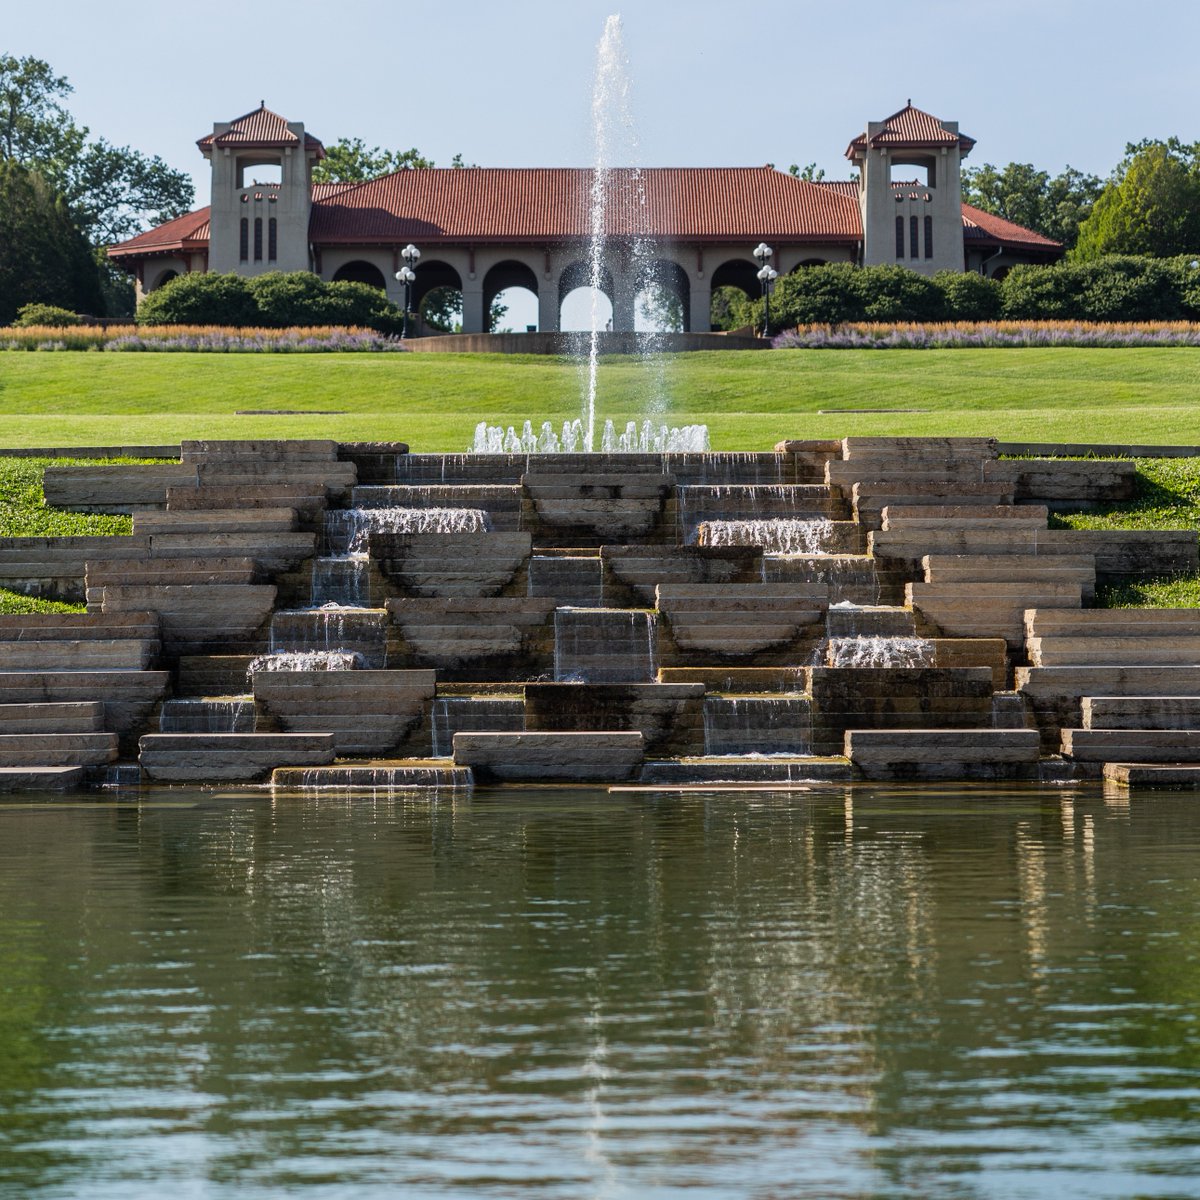 1/2 PSA - Kerth Fountain has a reflection pool but is not a swimming pool. 🚫 🏊 Water coming out of the fountain is like any other fountain in #StLouis but the fountain's pool is *not* treated the way a public swimming pool would be. #ForestPark4ever #StL @STLCityGov